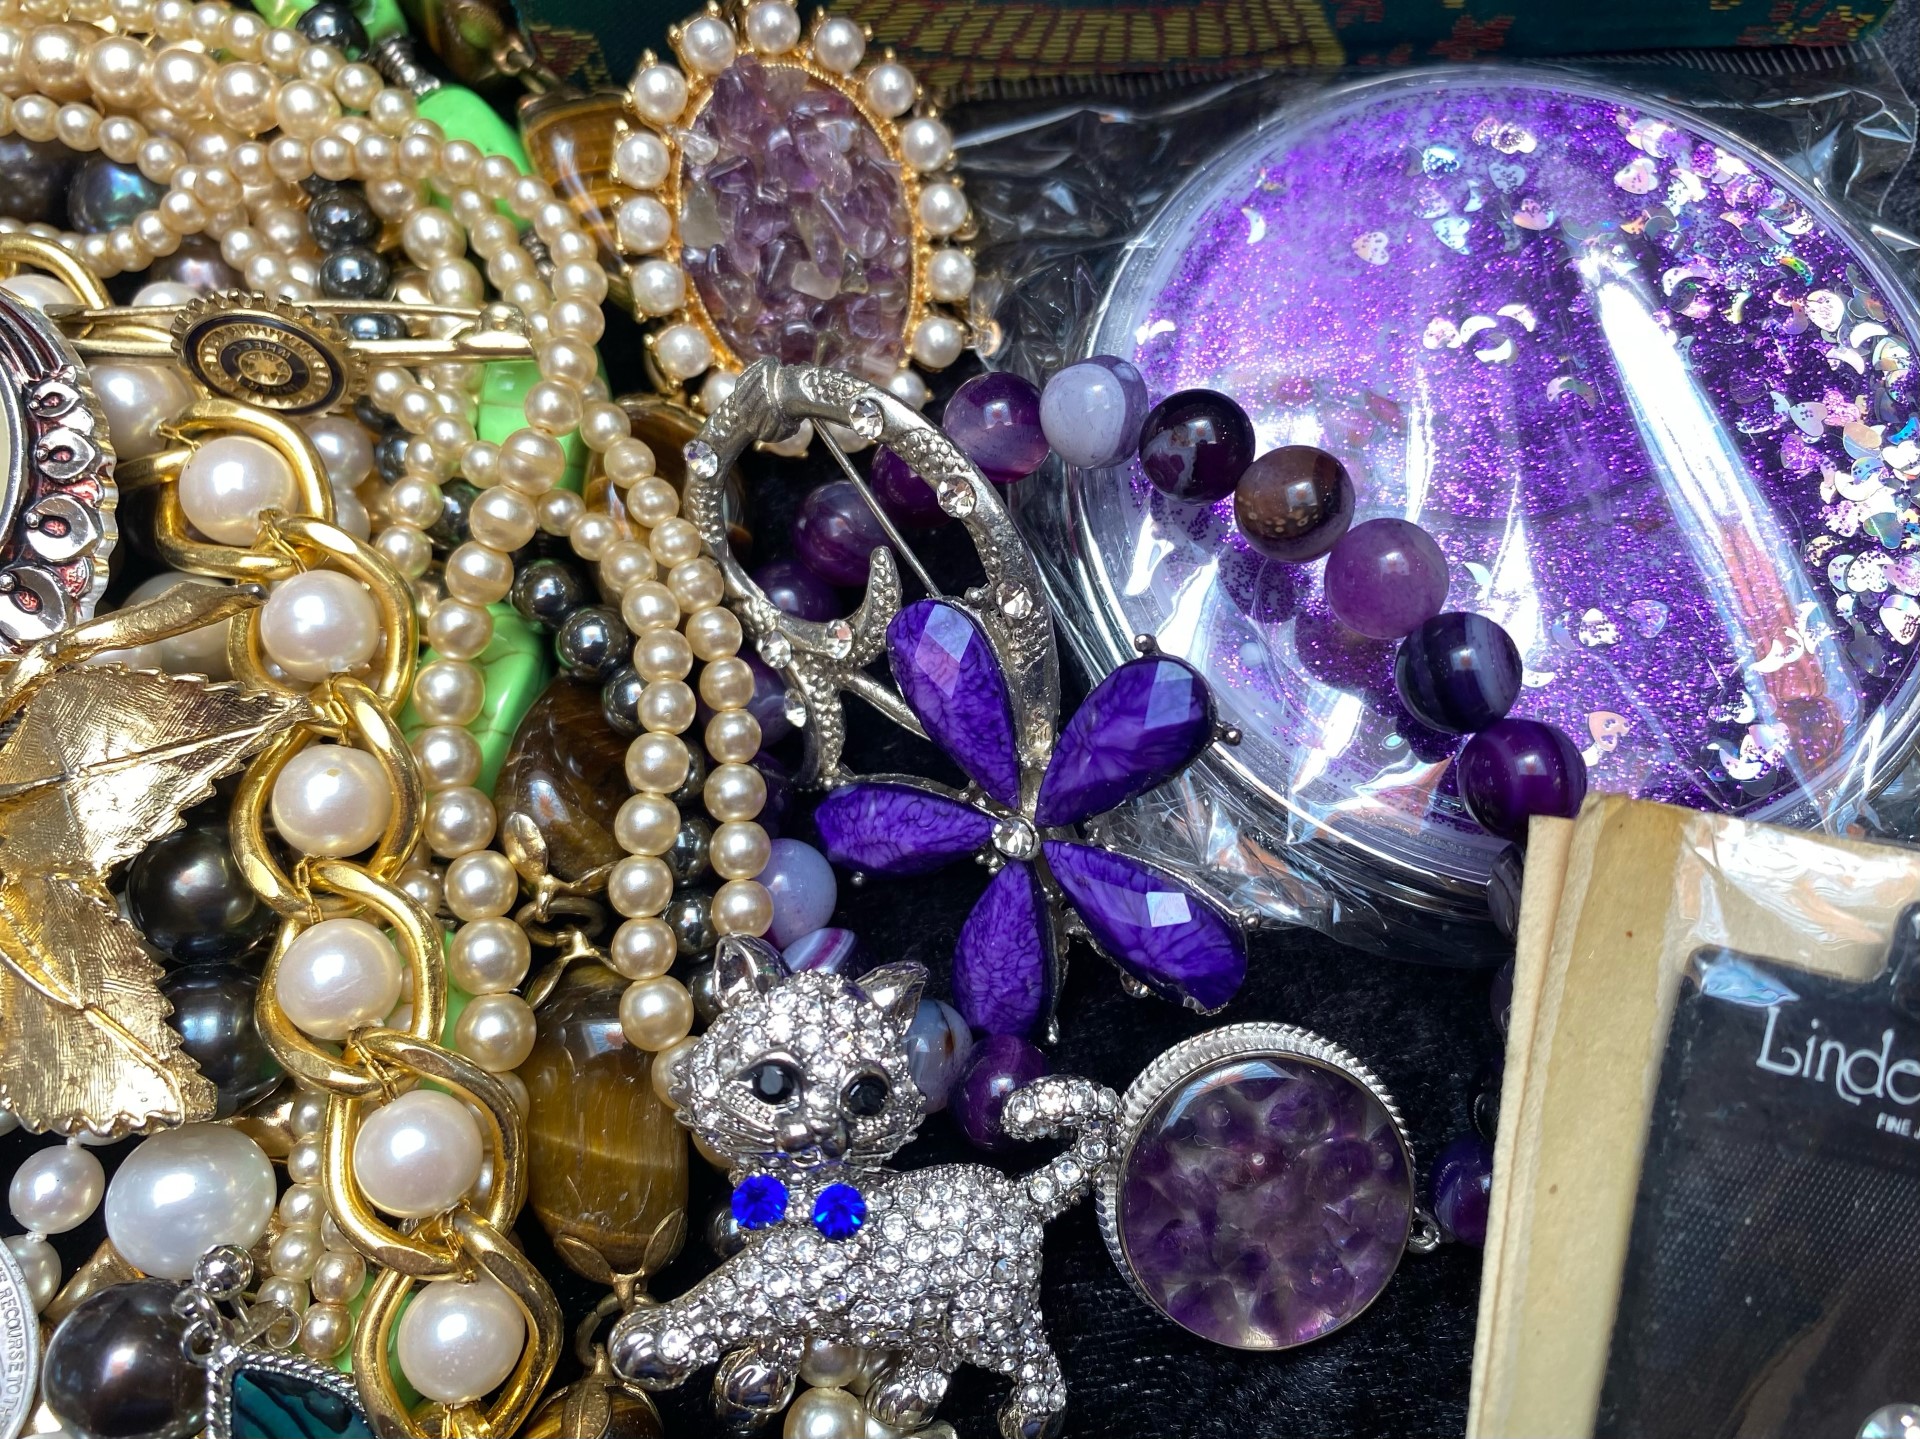 Box of Costume Jewellery & Collectibles, including a one carat CZ stone with certificate, pearls, - Image 4 of 5